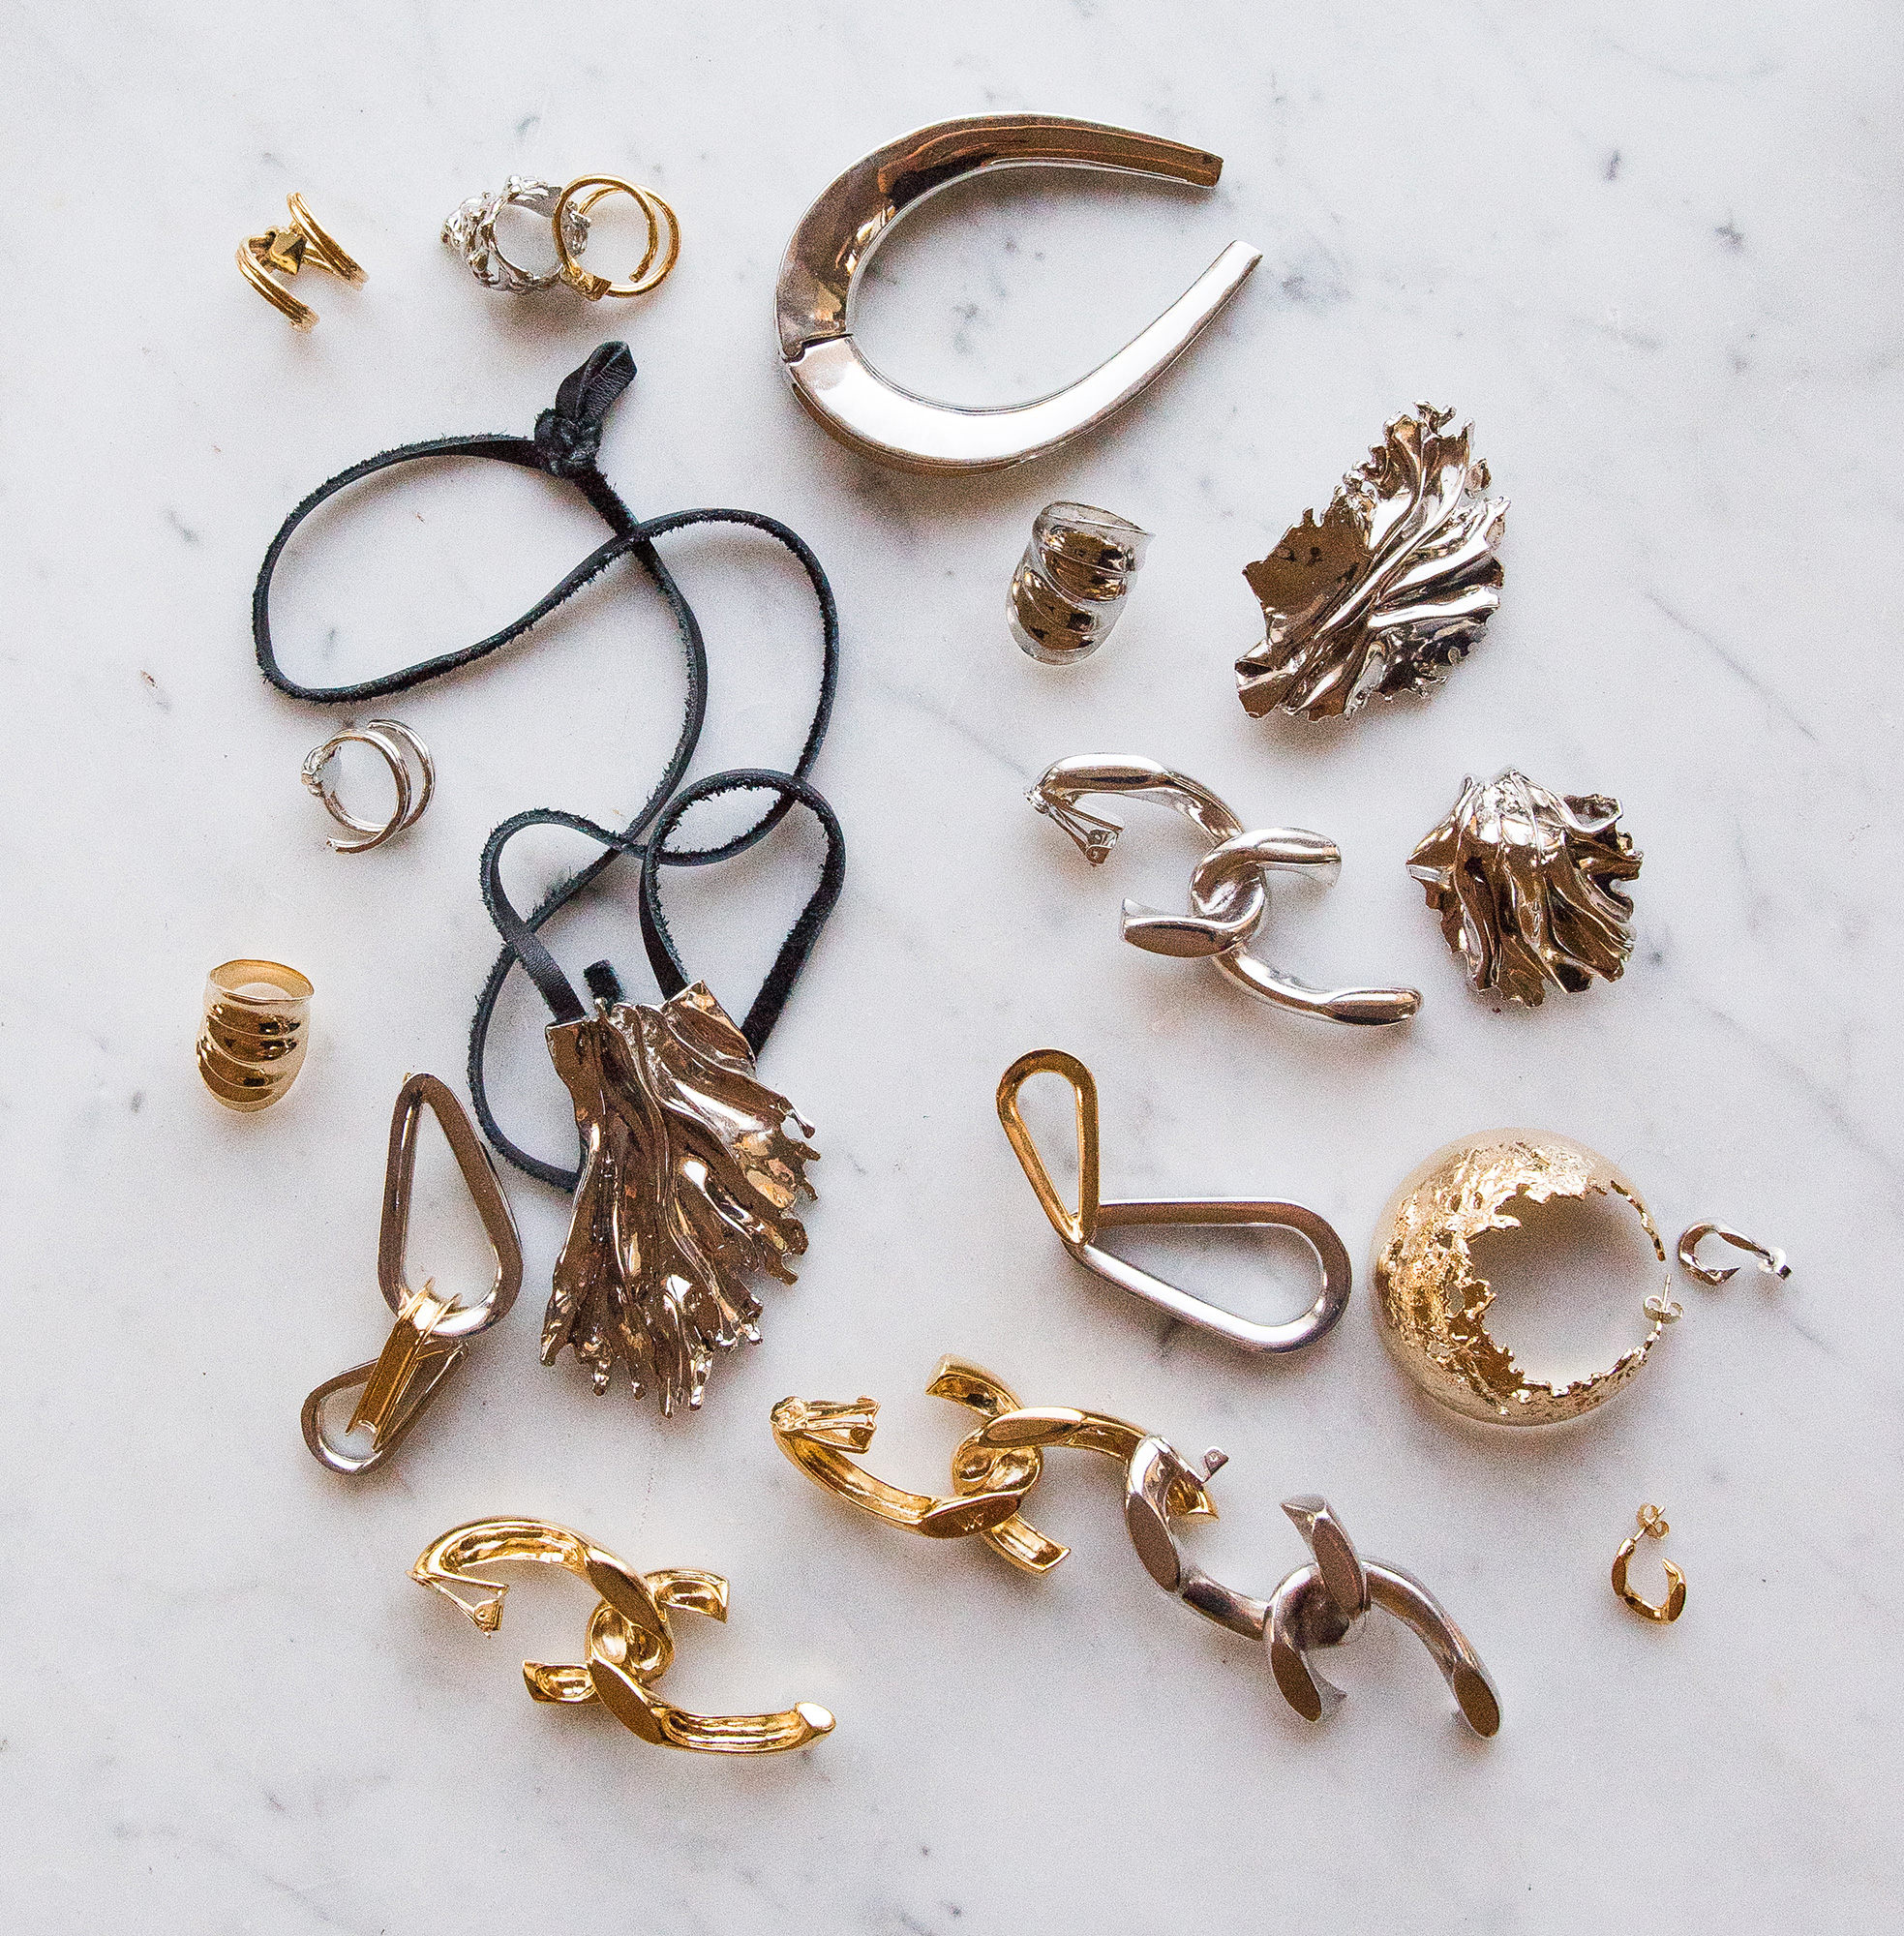 Designer Annelise Michelson Talks Her New Jewelry Line - Coveteur